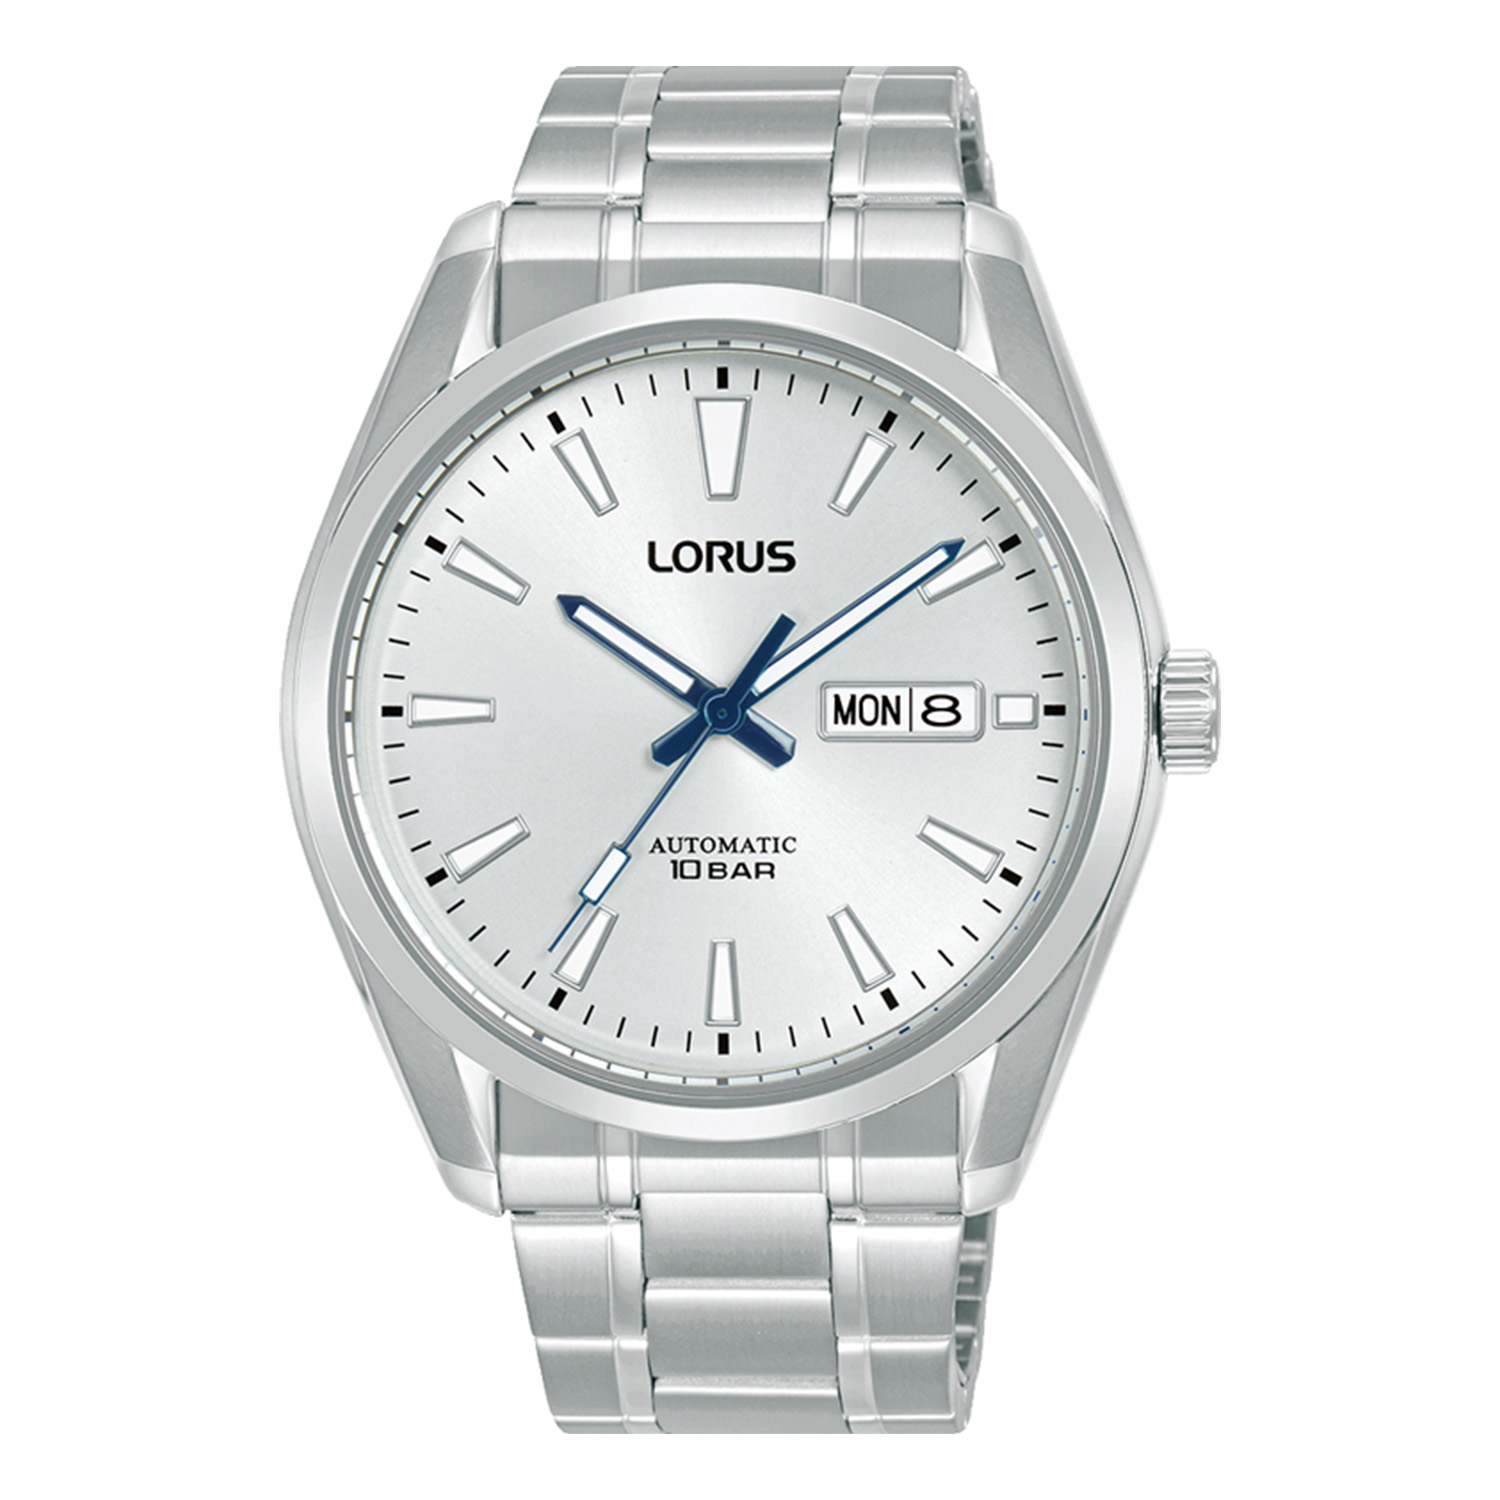 Mens LORUS stainless steel watch with white dial and silver bracelet.